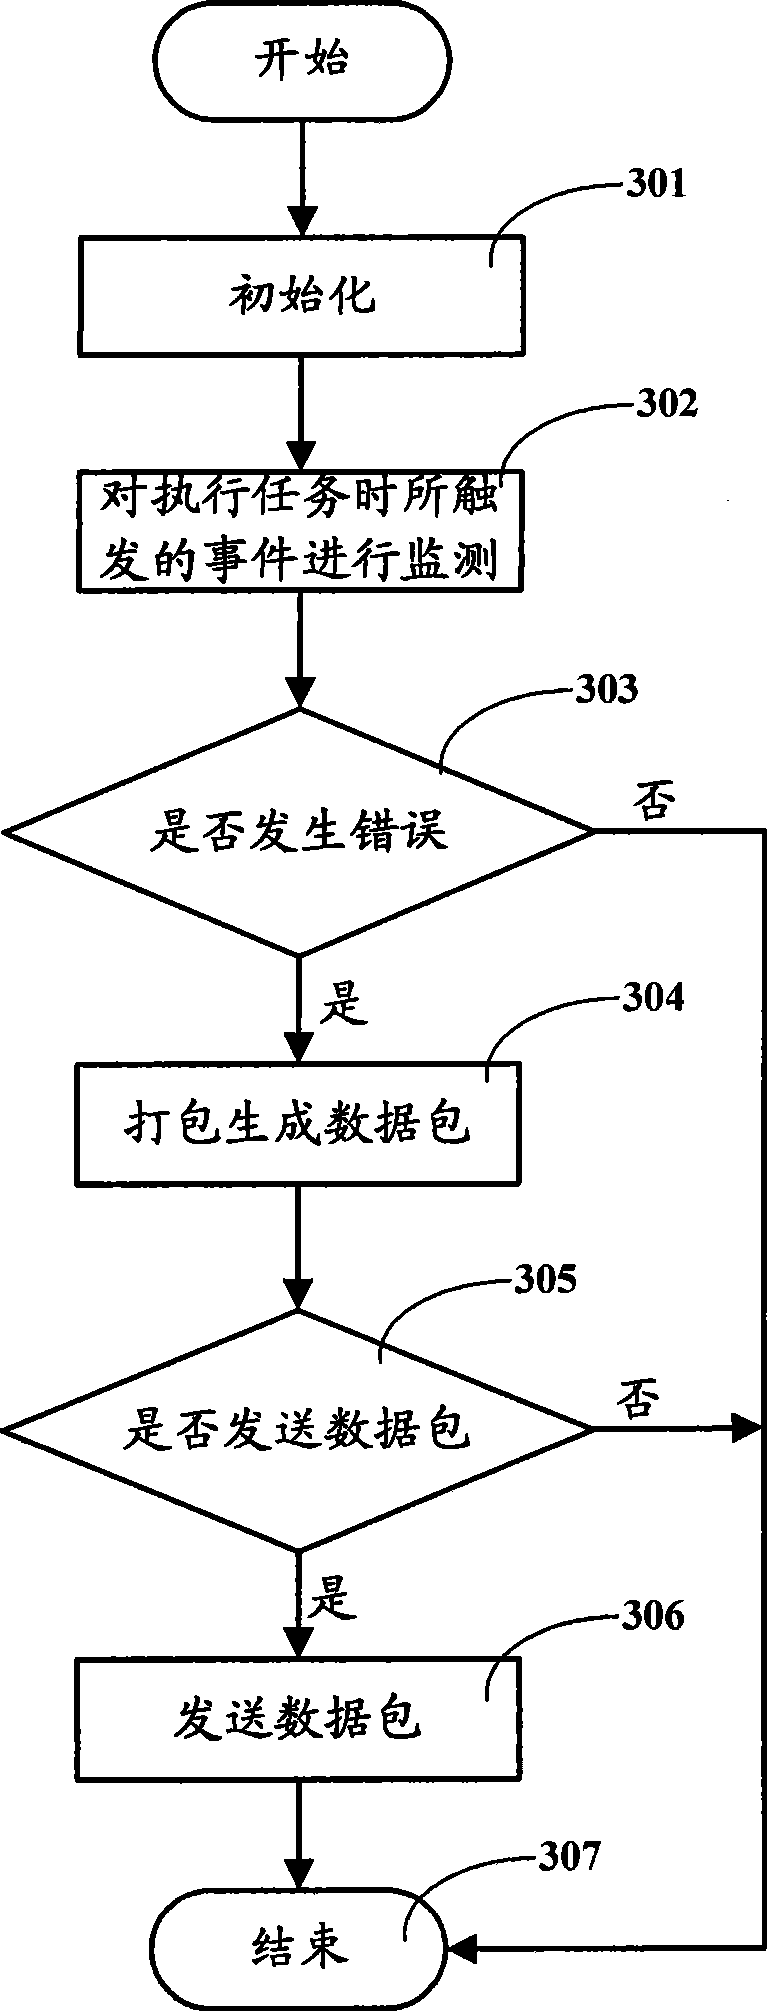 Method and apparatus for monitoring system state and event record of mobile terminal